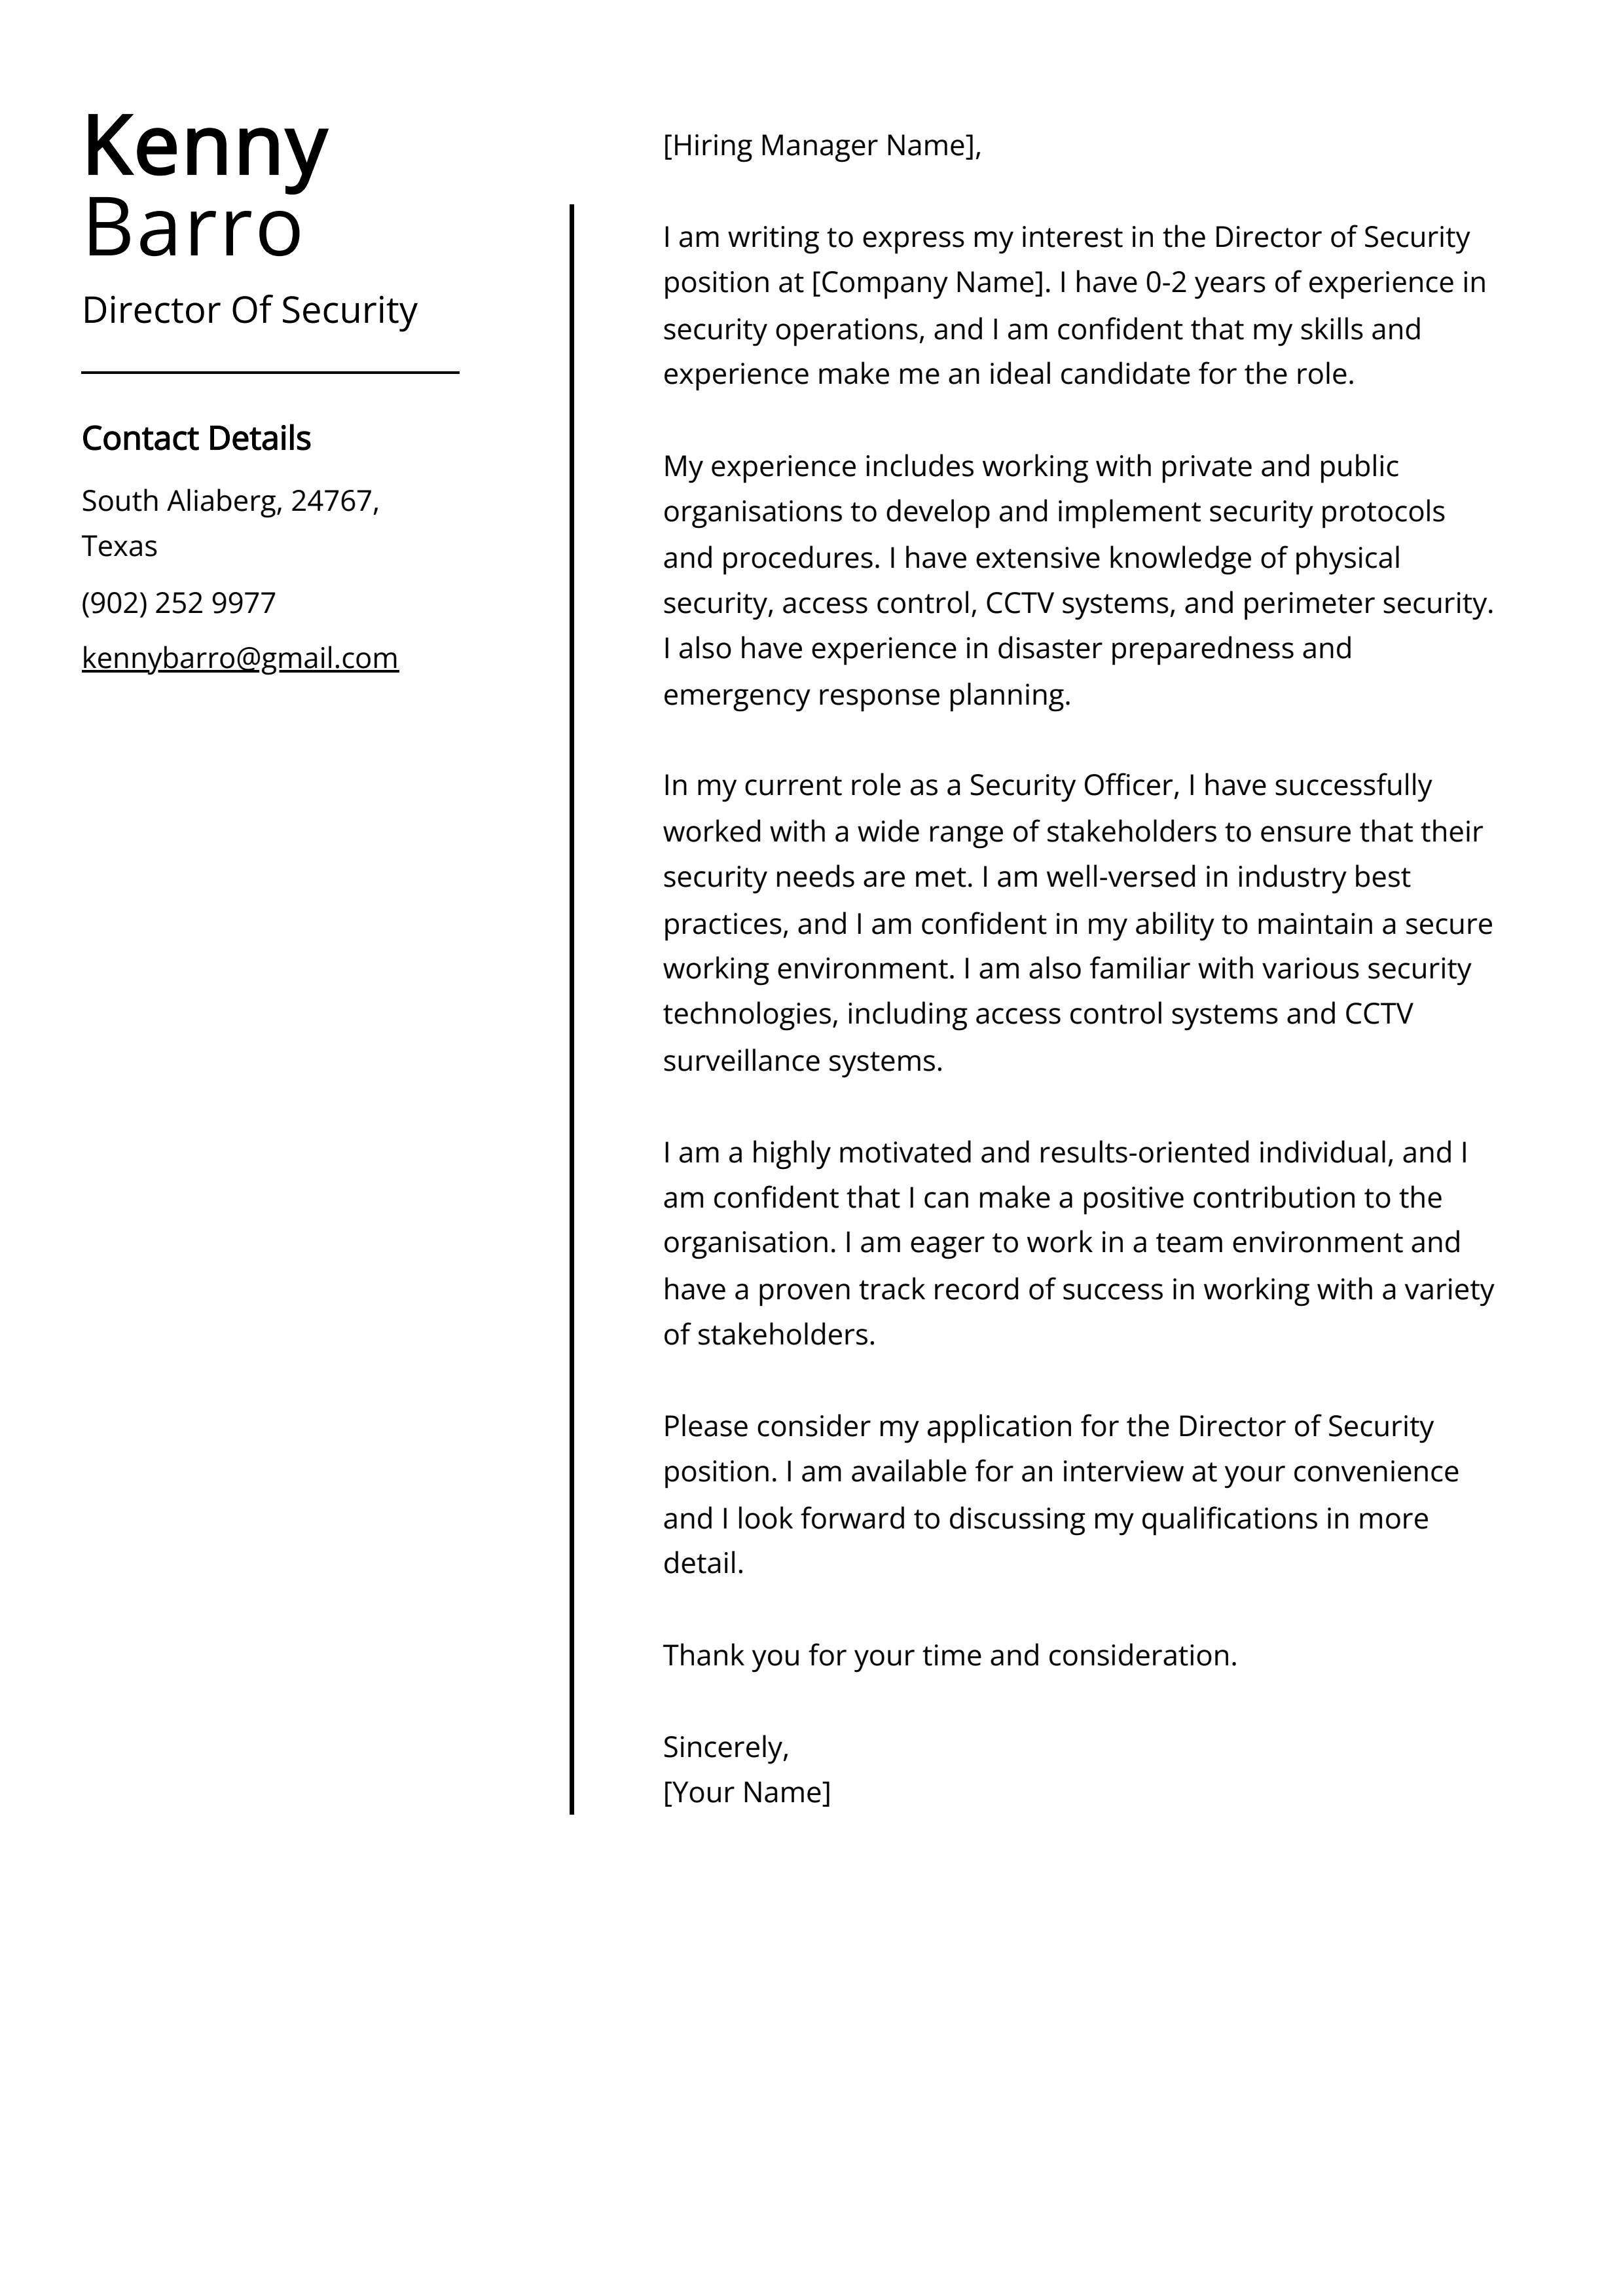 Director Of Security Cover Letter Example